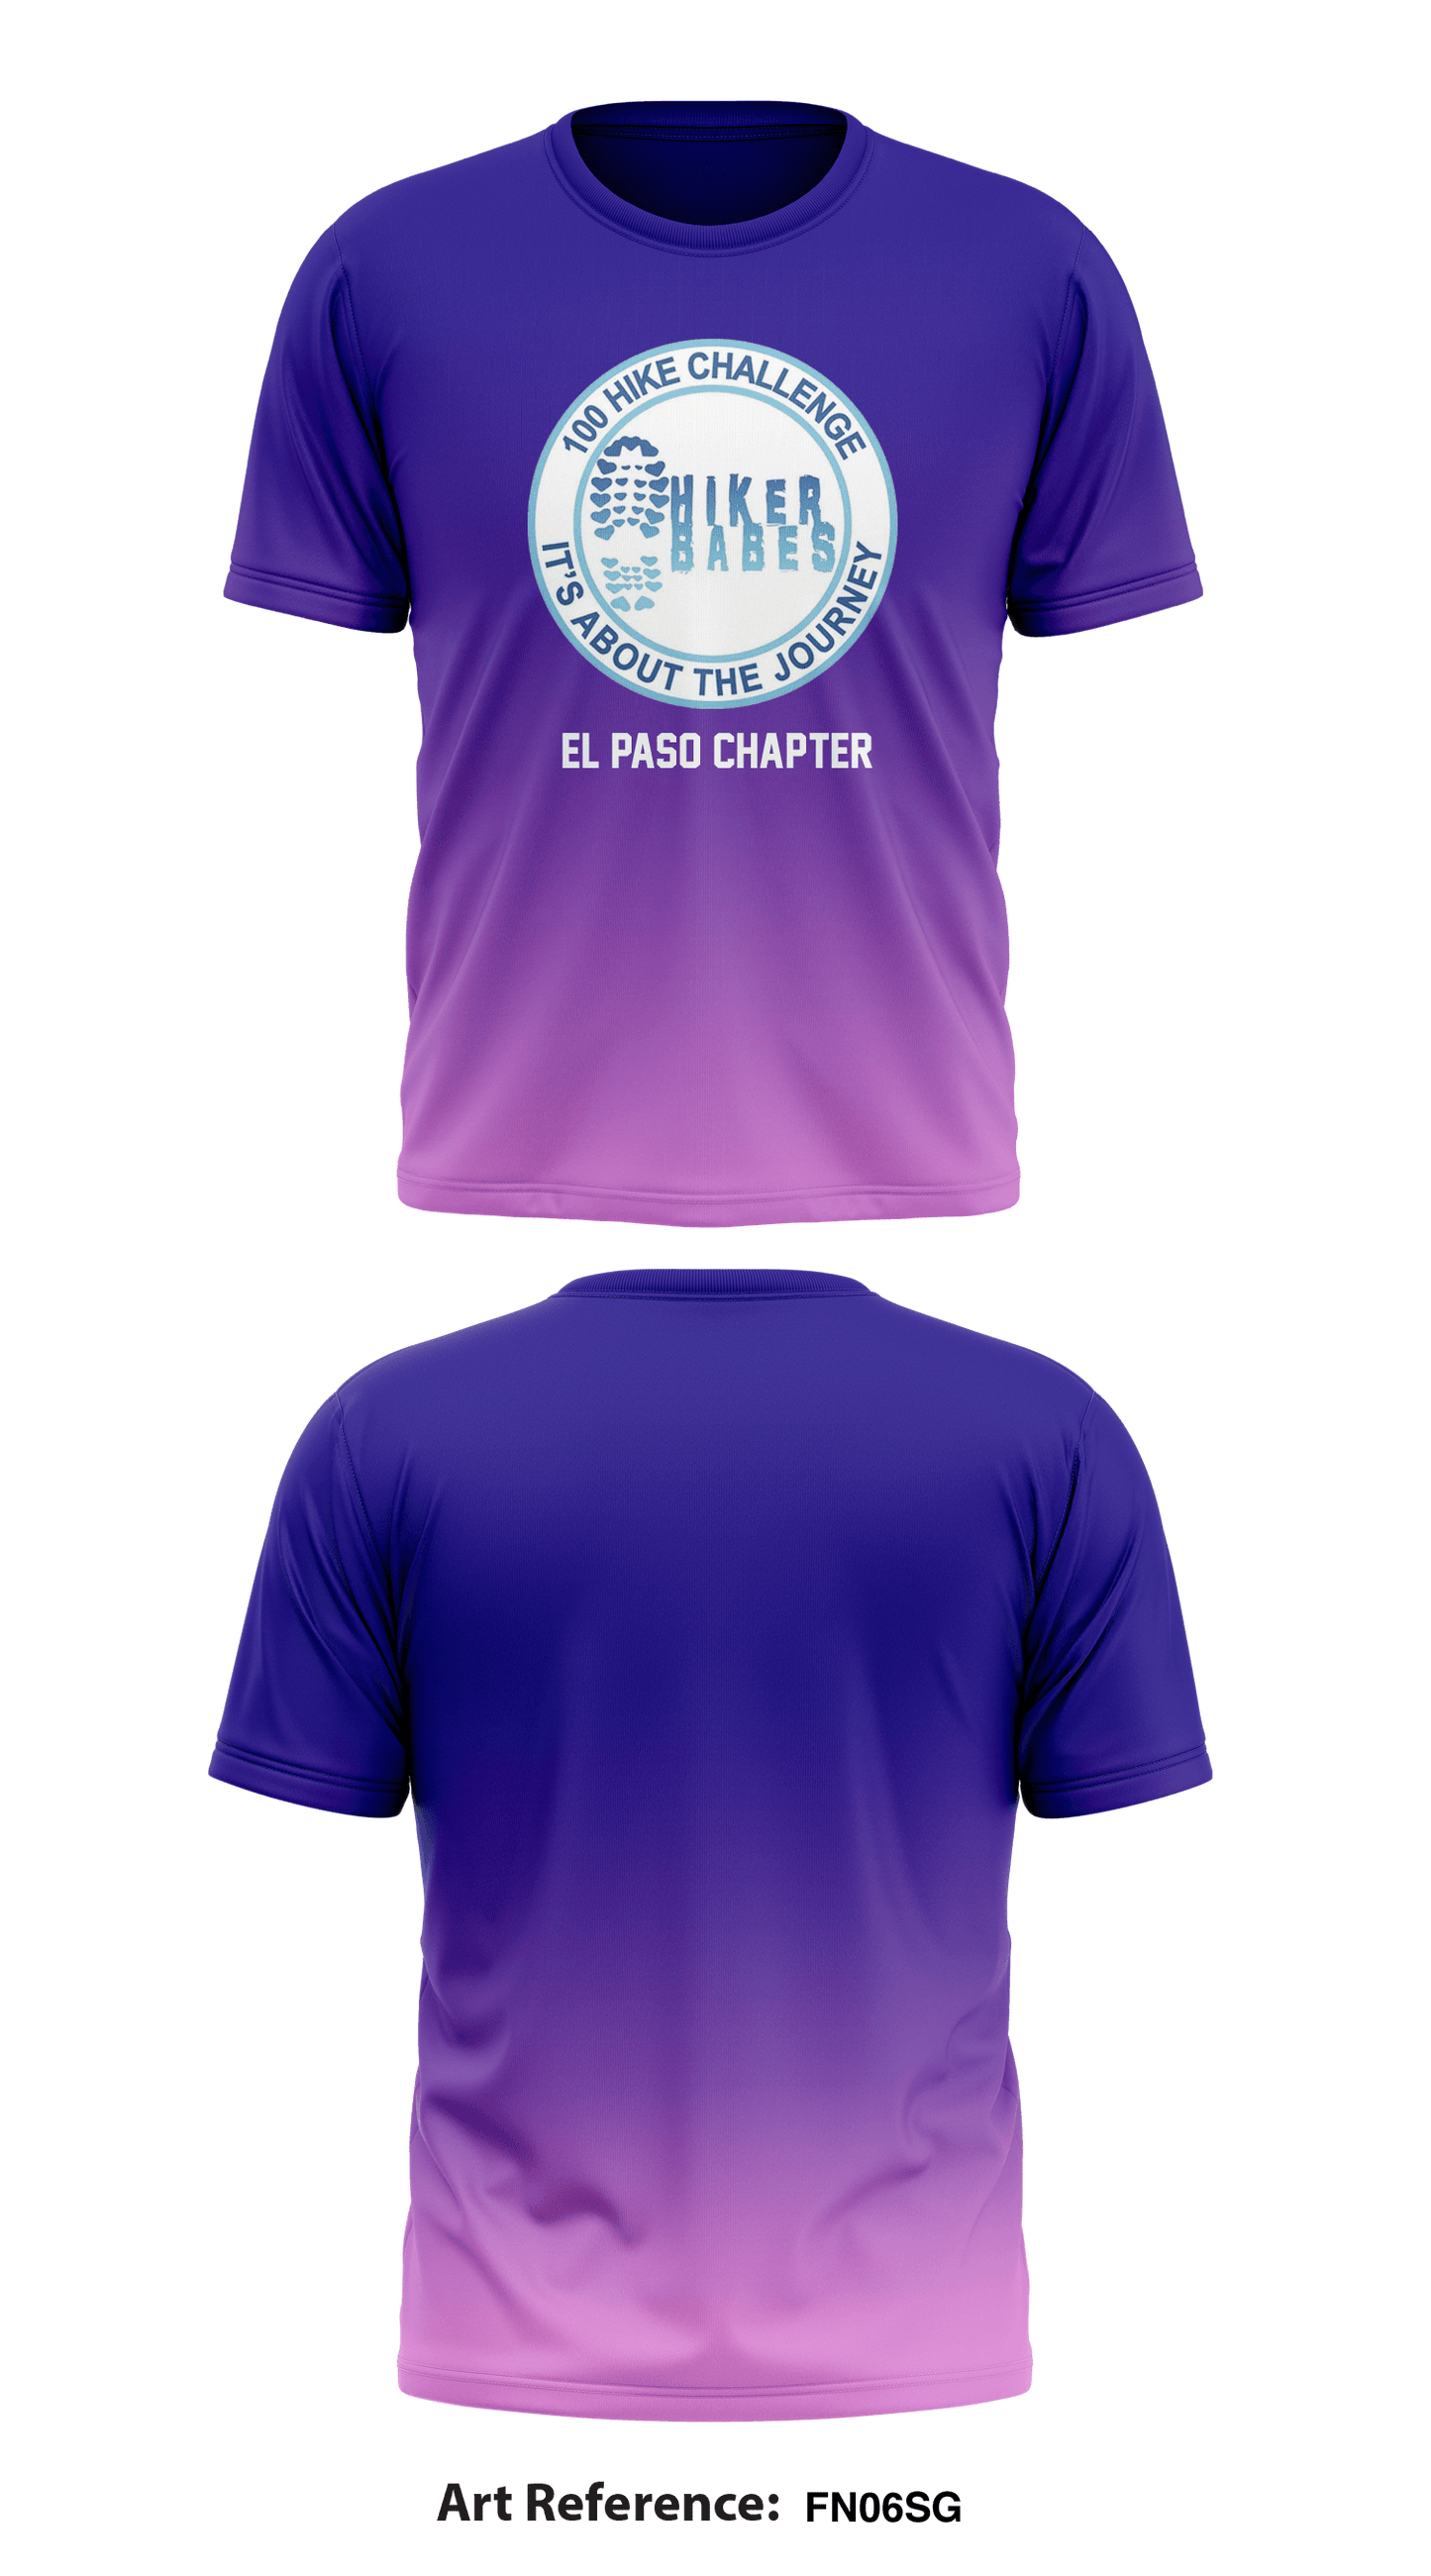 Hikerbabes Community: El Paso Chapter Core Men's SS Performance Tee - Fn06sg